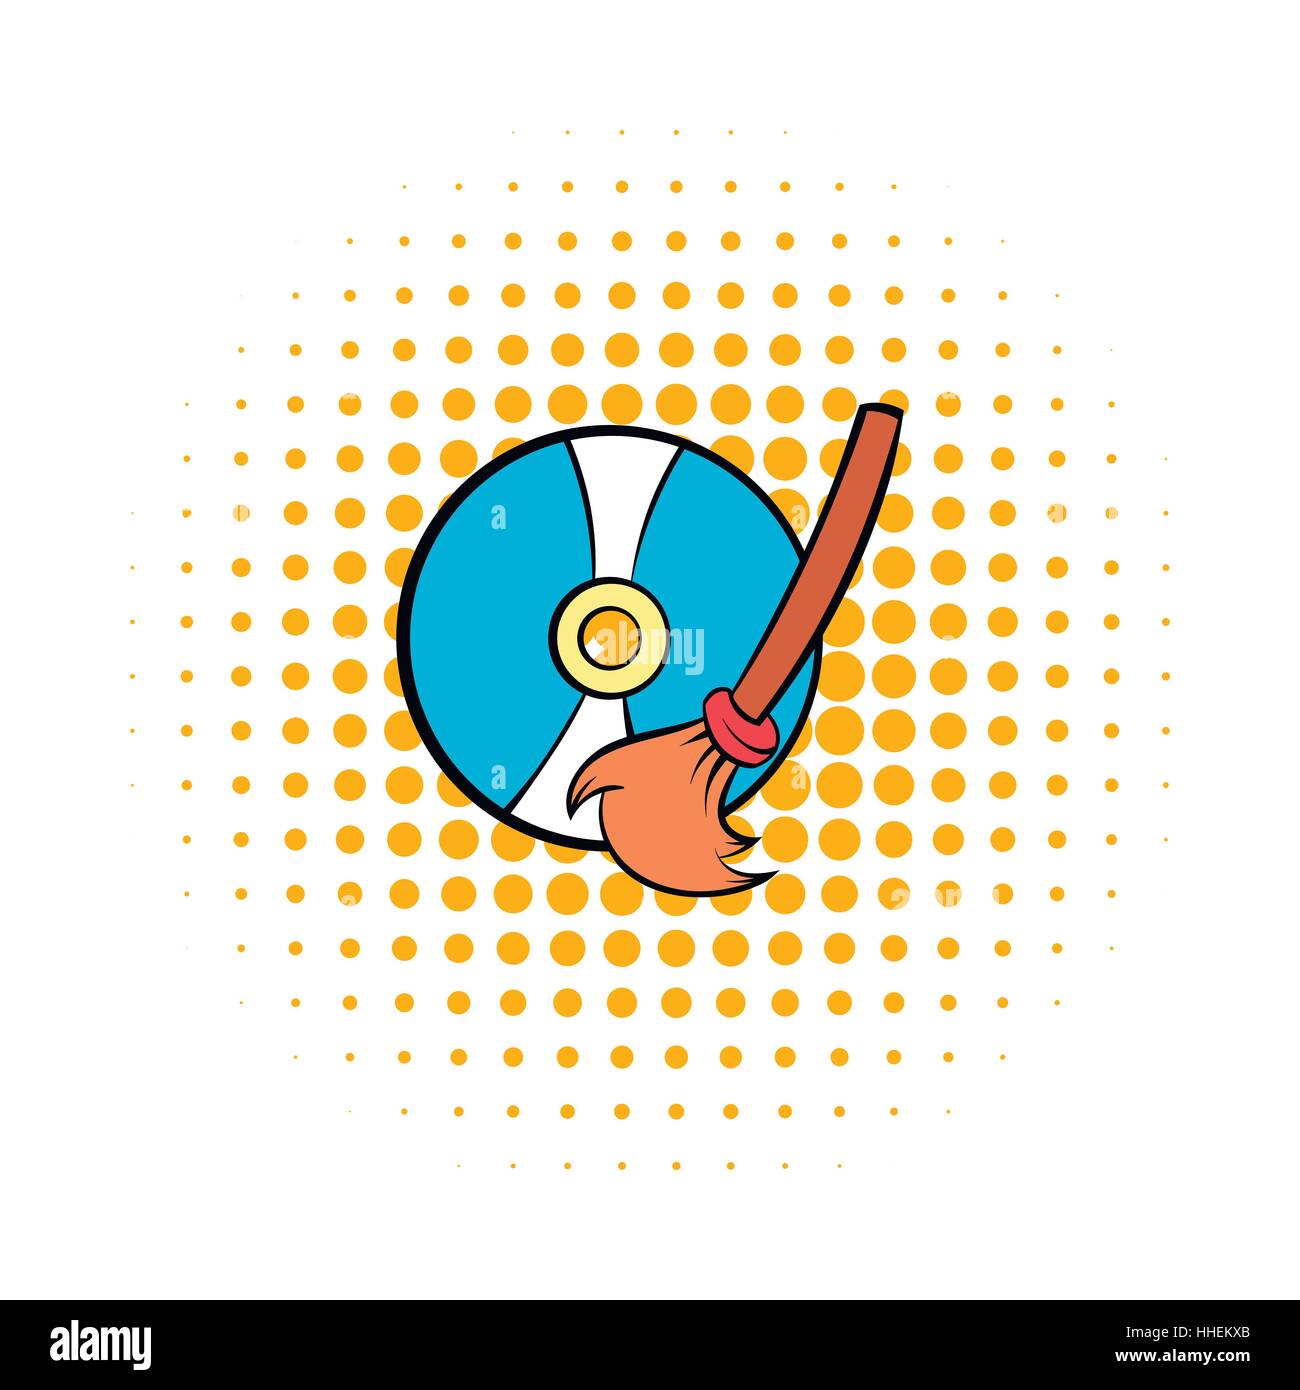 Clean up hard drive icon, comics style Stock Vector